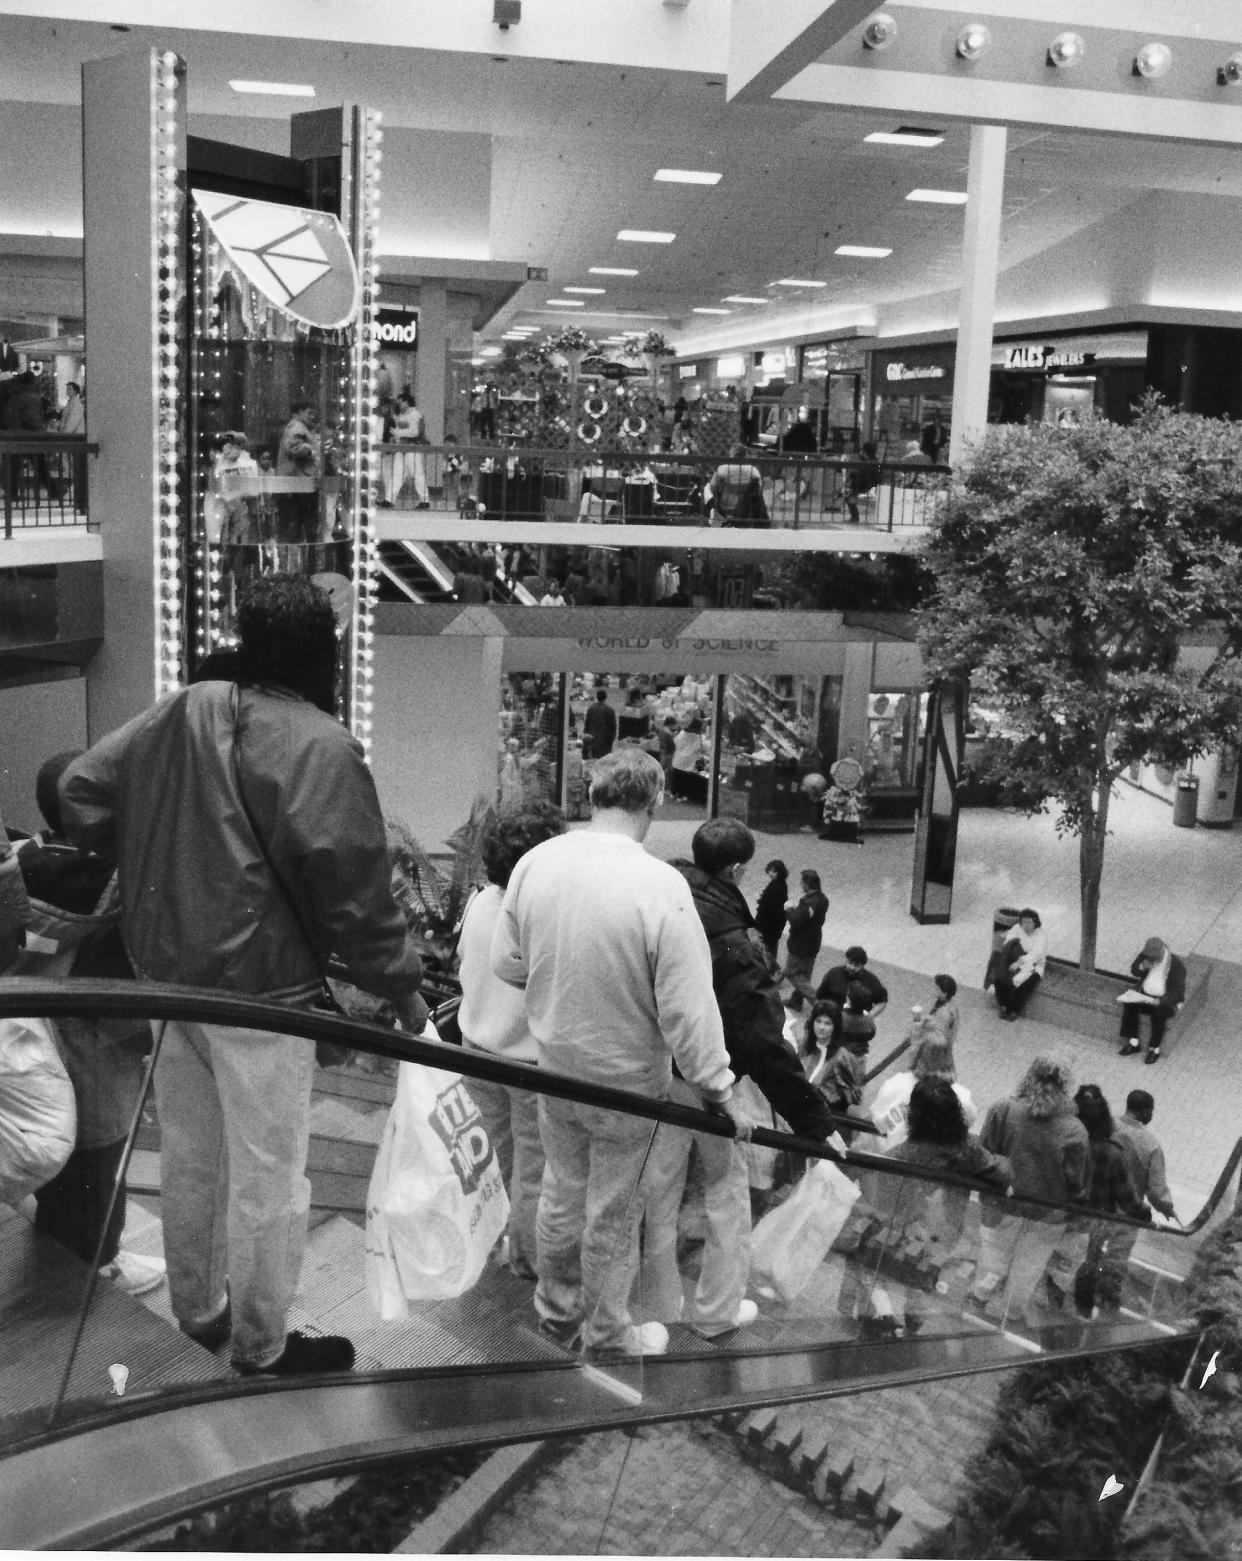 Akron shoppers use the escalators at Rolling Acres Mall in 1992. The bubble elevator is visible in the background.